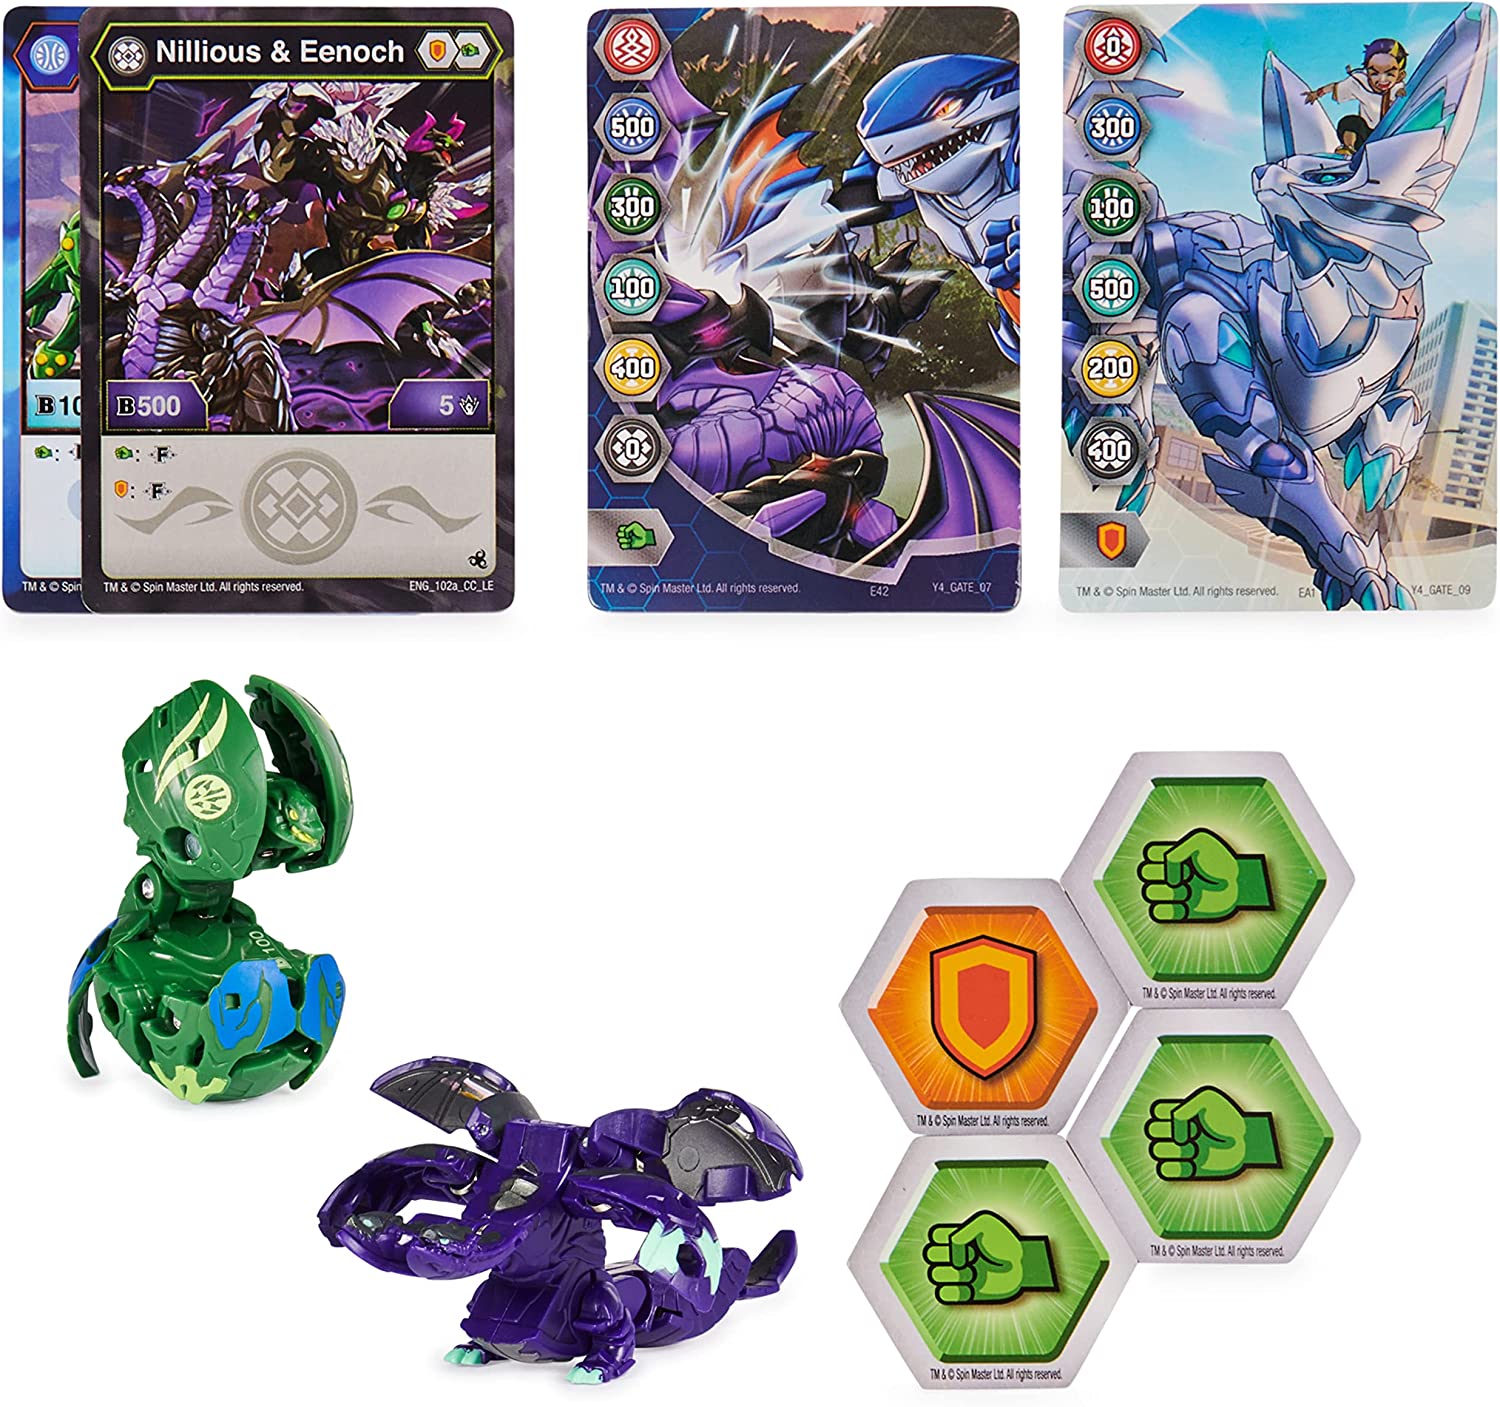 Bakugan Evolutions – Core Evolutions Series 4 – Awesome Toys Gifts